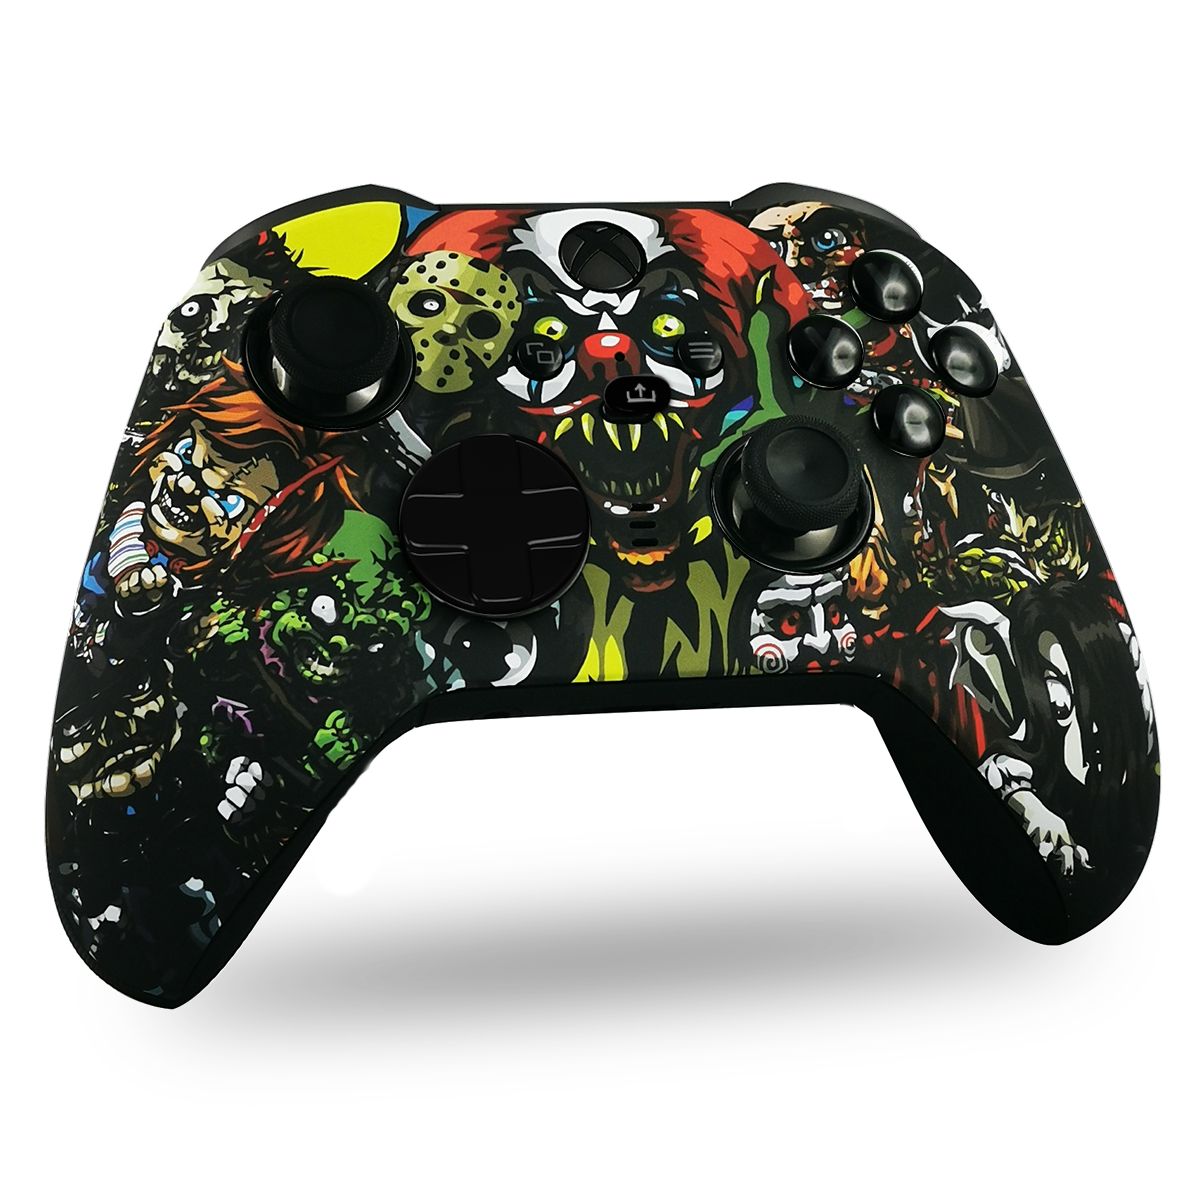 manette-xbox-series-x-custom-chucky-manette-personnalisee-xbox-series-s-draw-my-pad